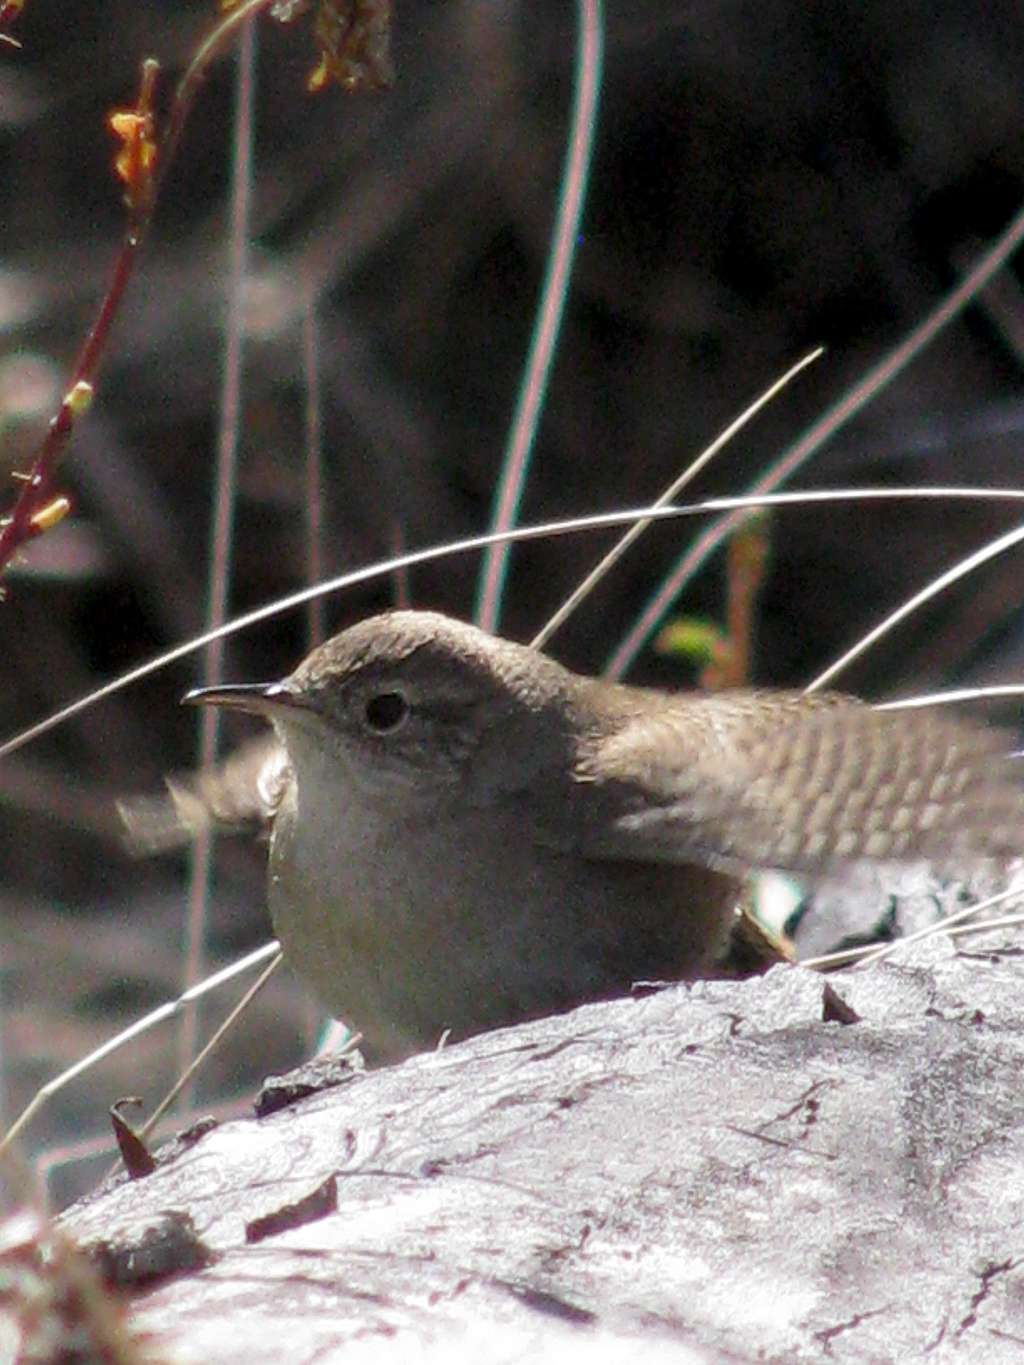 Wren - trying to impress a female